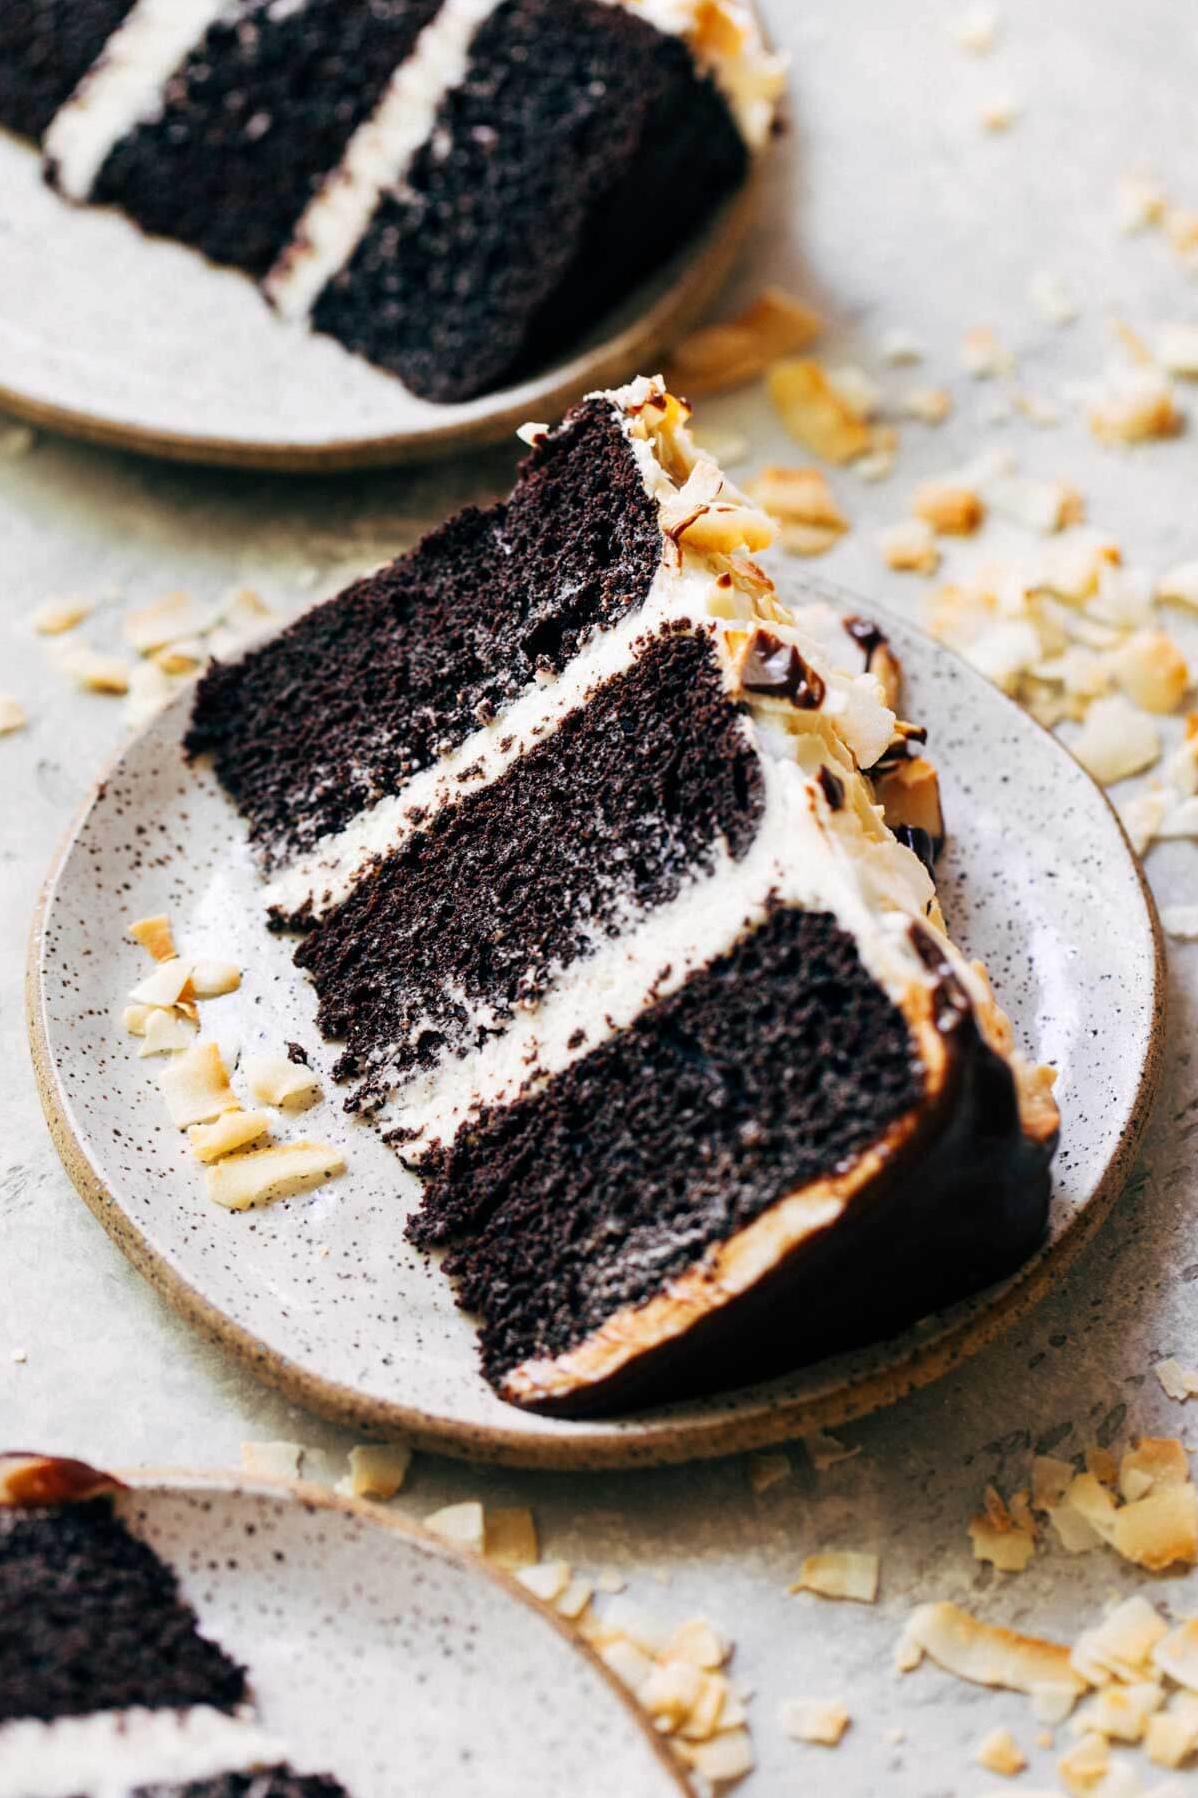  You'll never guess this cake is gluten-free, dairy-free and made with organic ingredients.